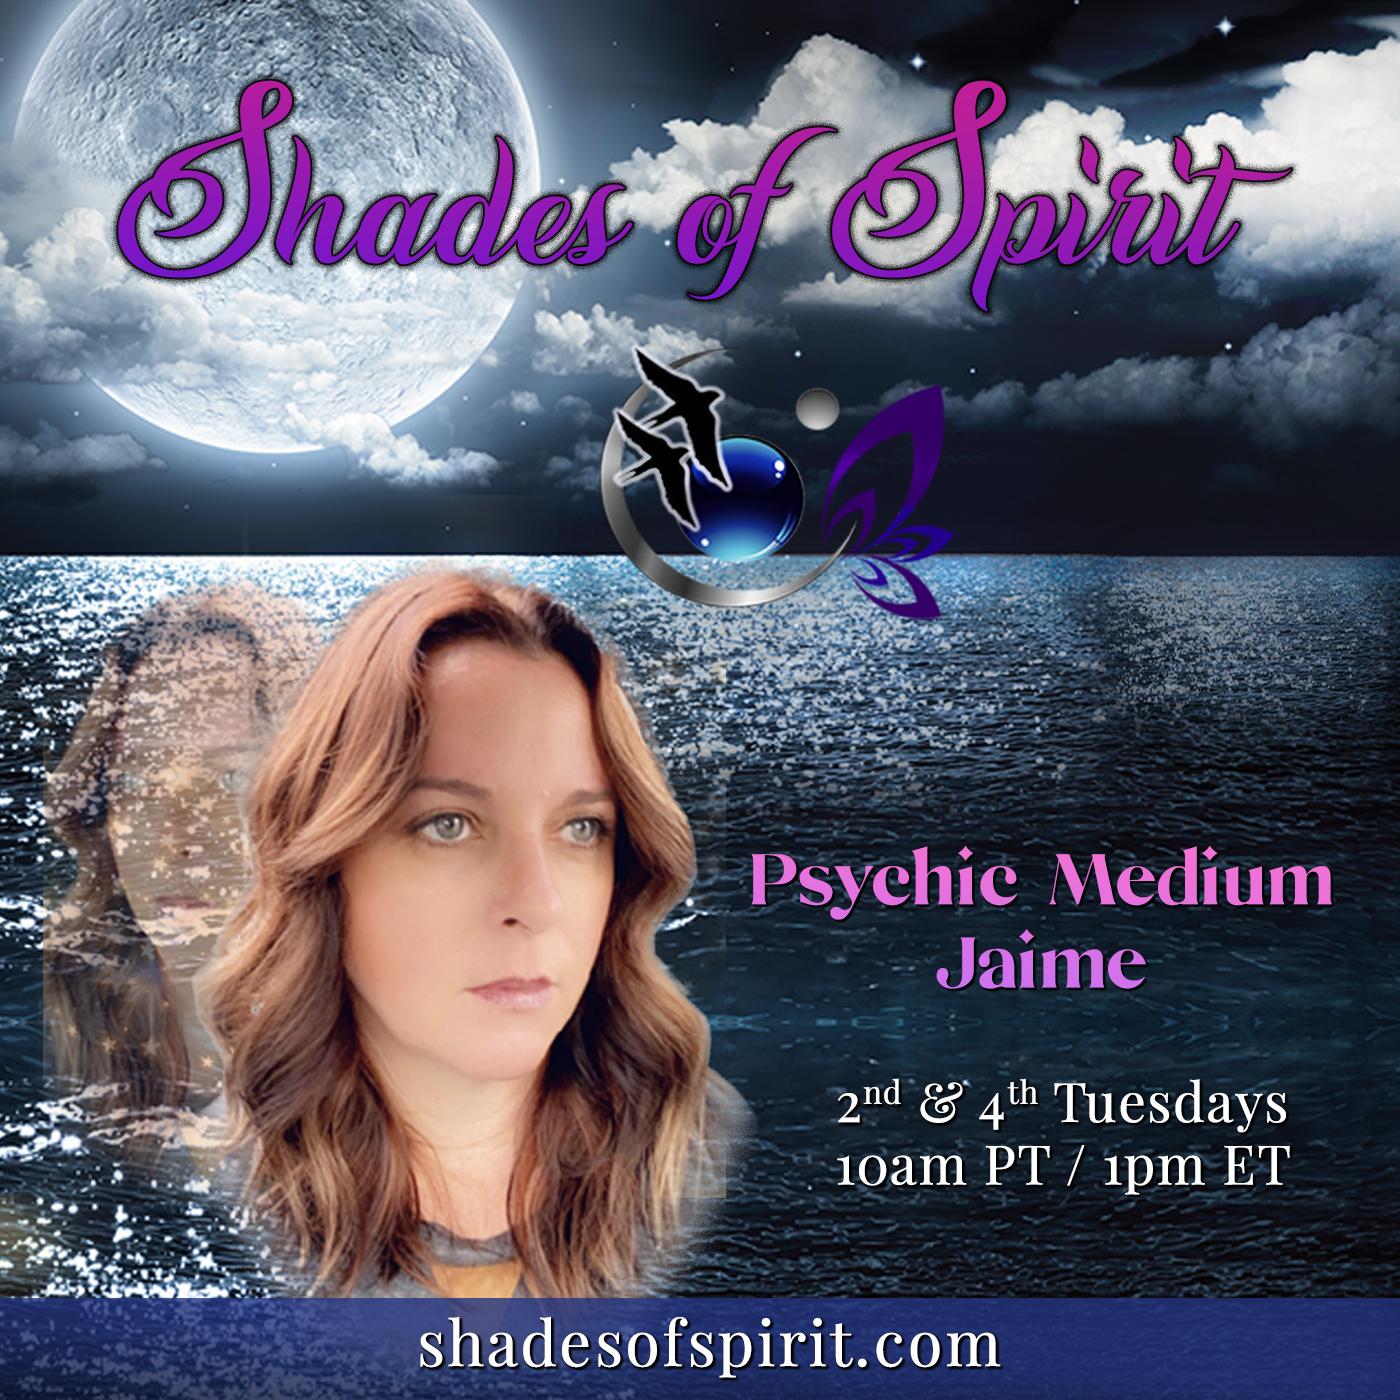 Shades of Spirit: Making Sacred Connections Bringing A Shade Of Spirit To You with Psychic Medium Jaime and 